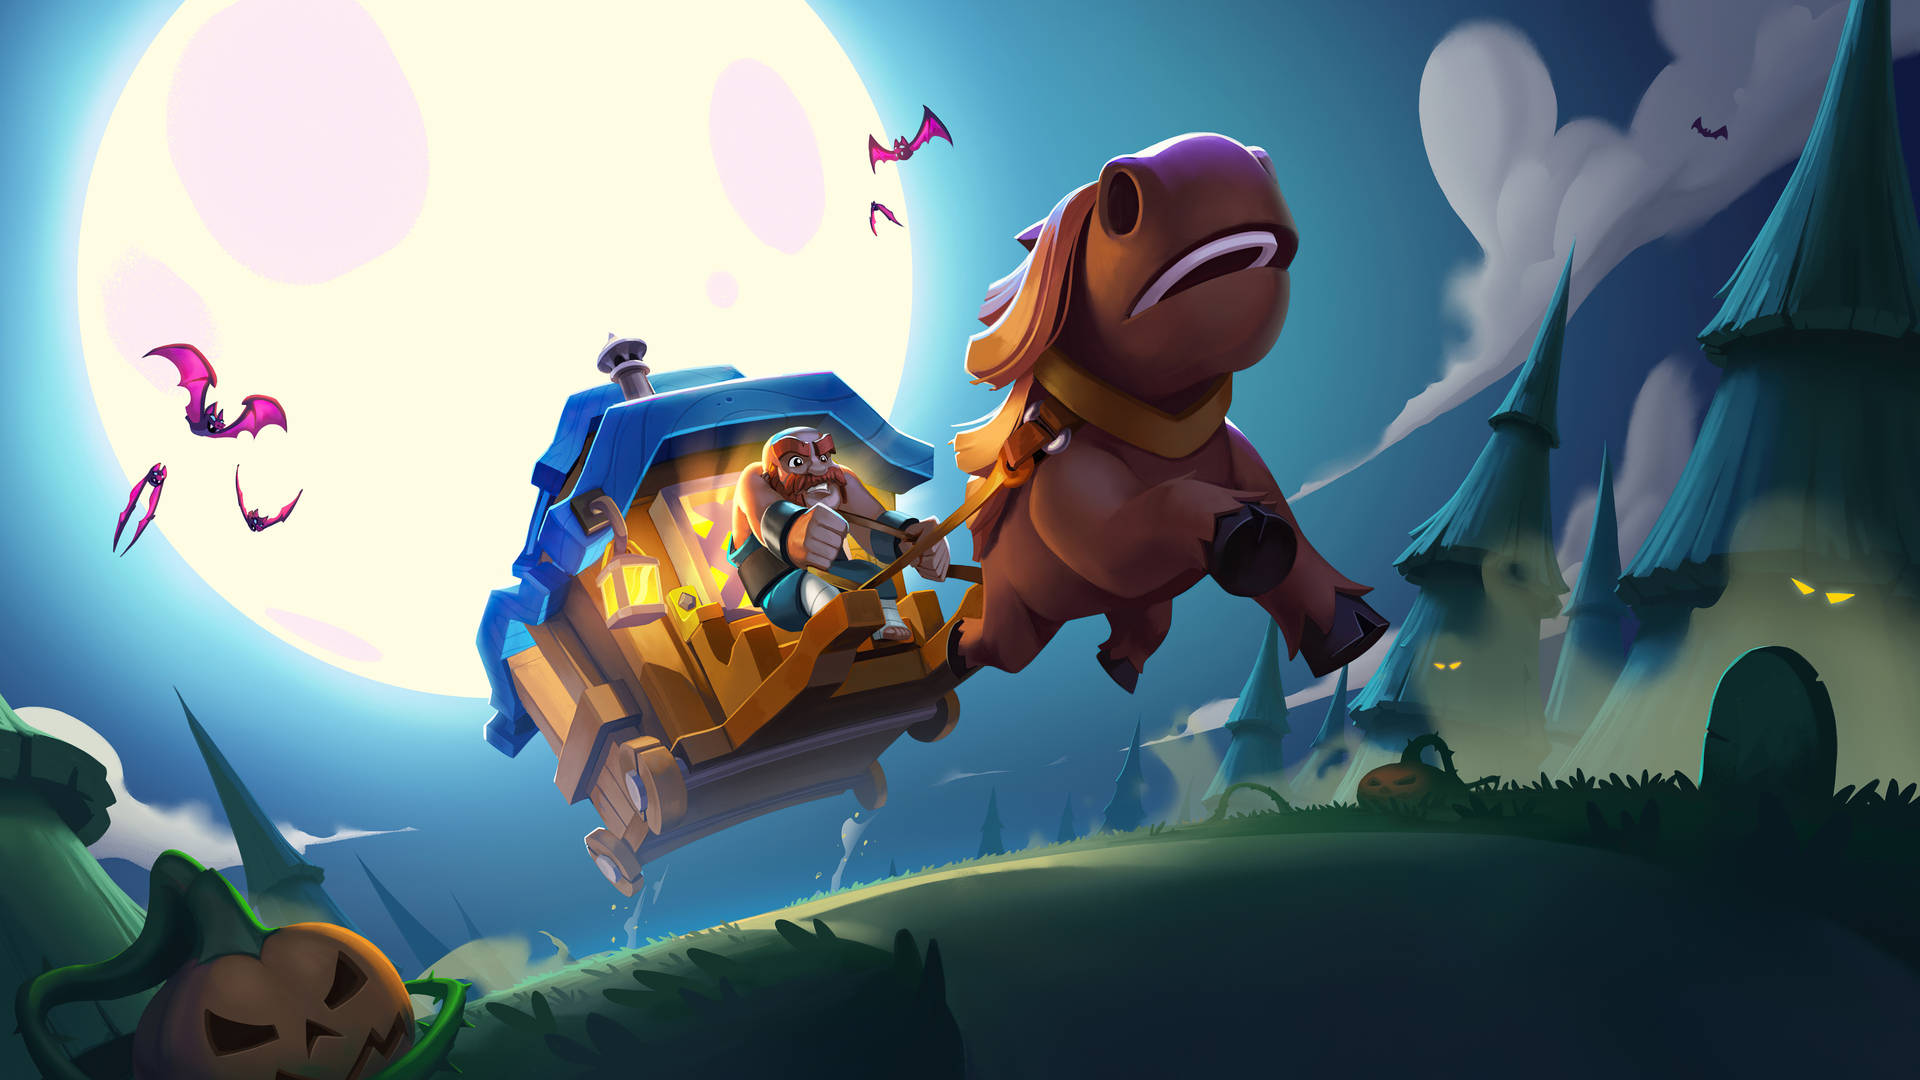 Giant Riding A Wagon Clash Of Clans Wallpaper